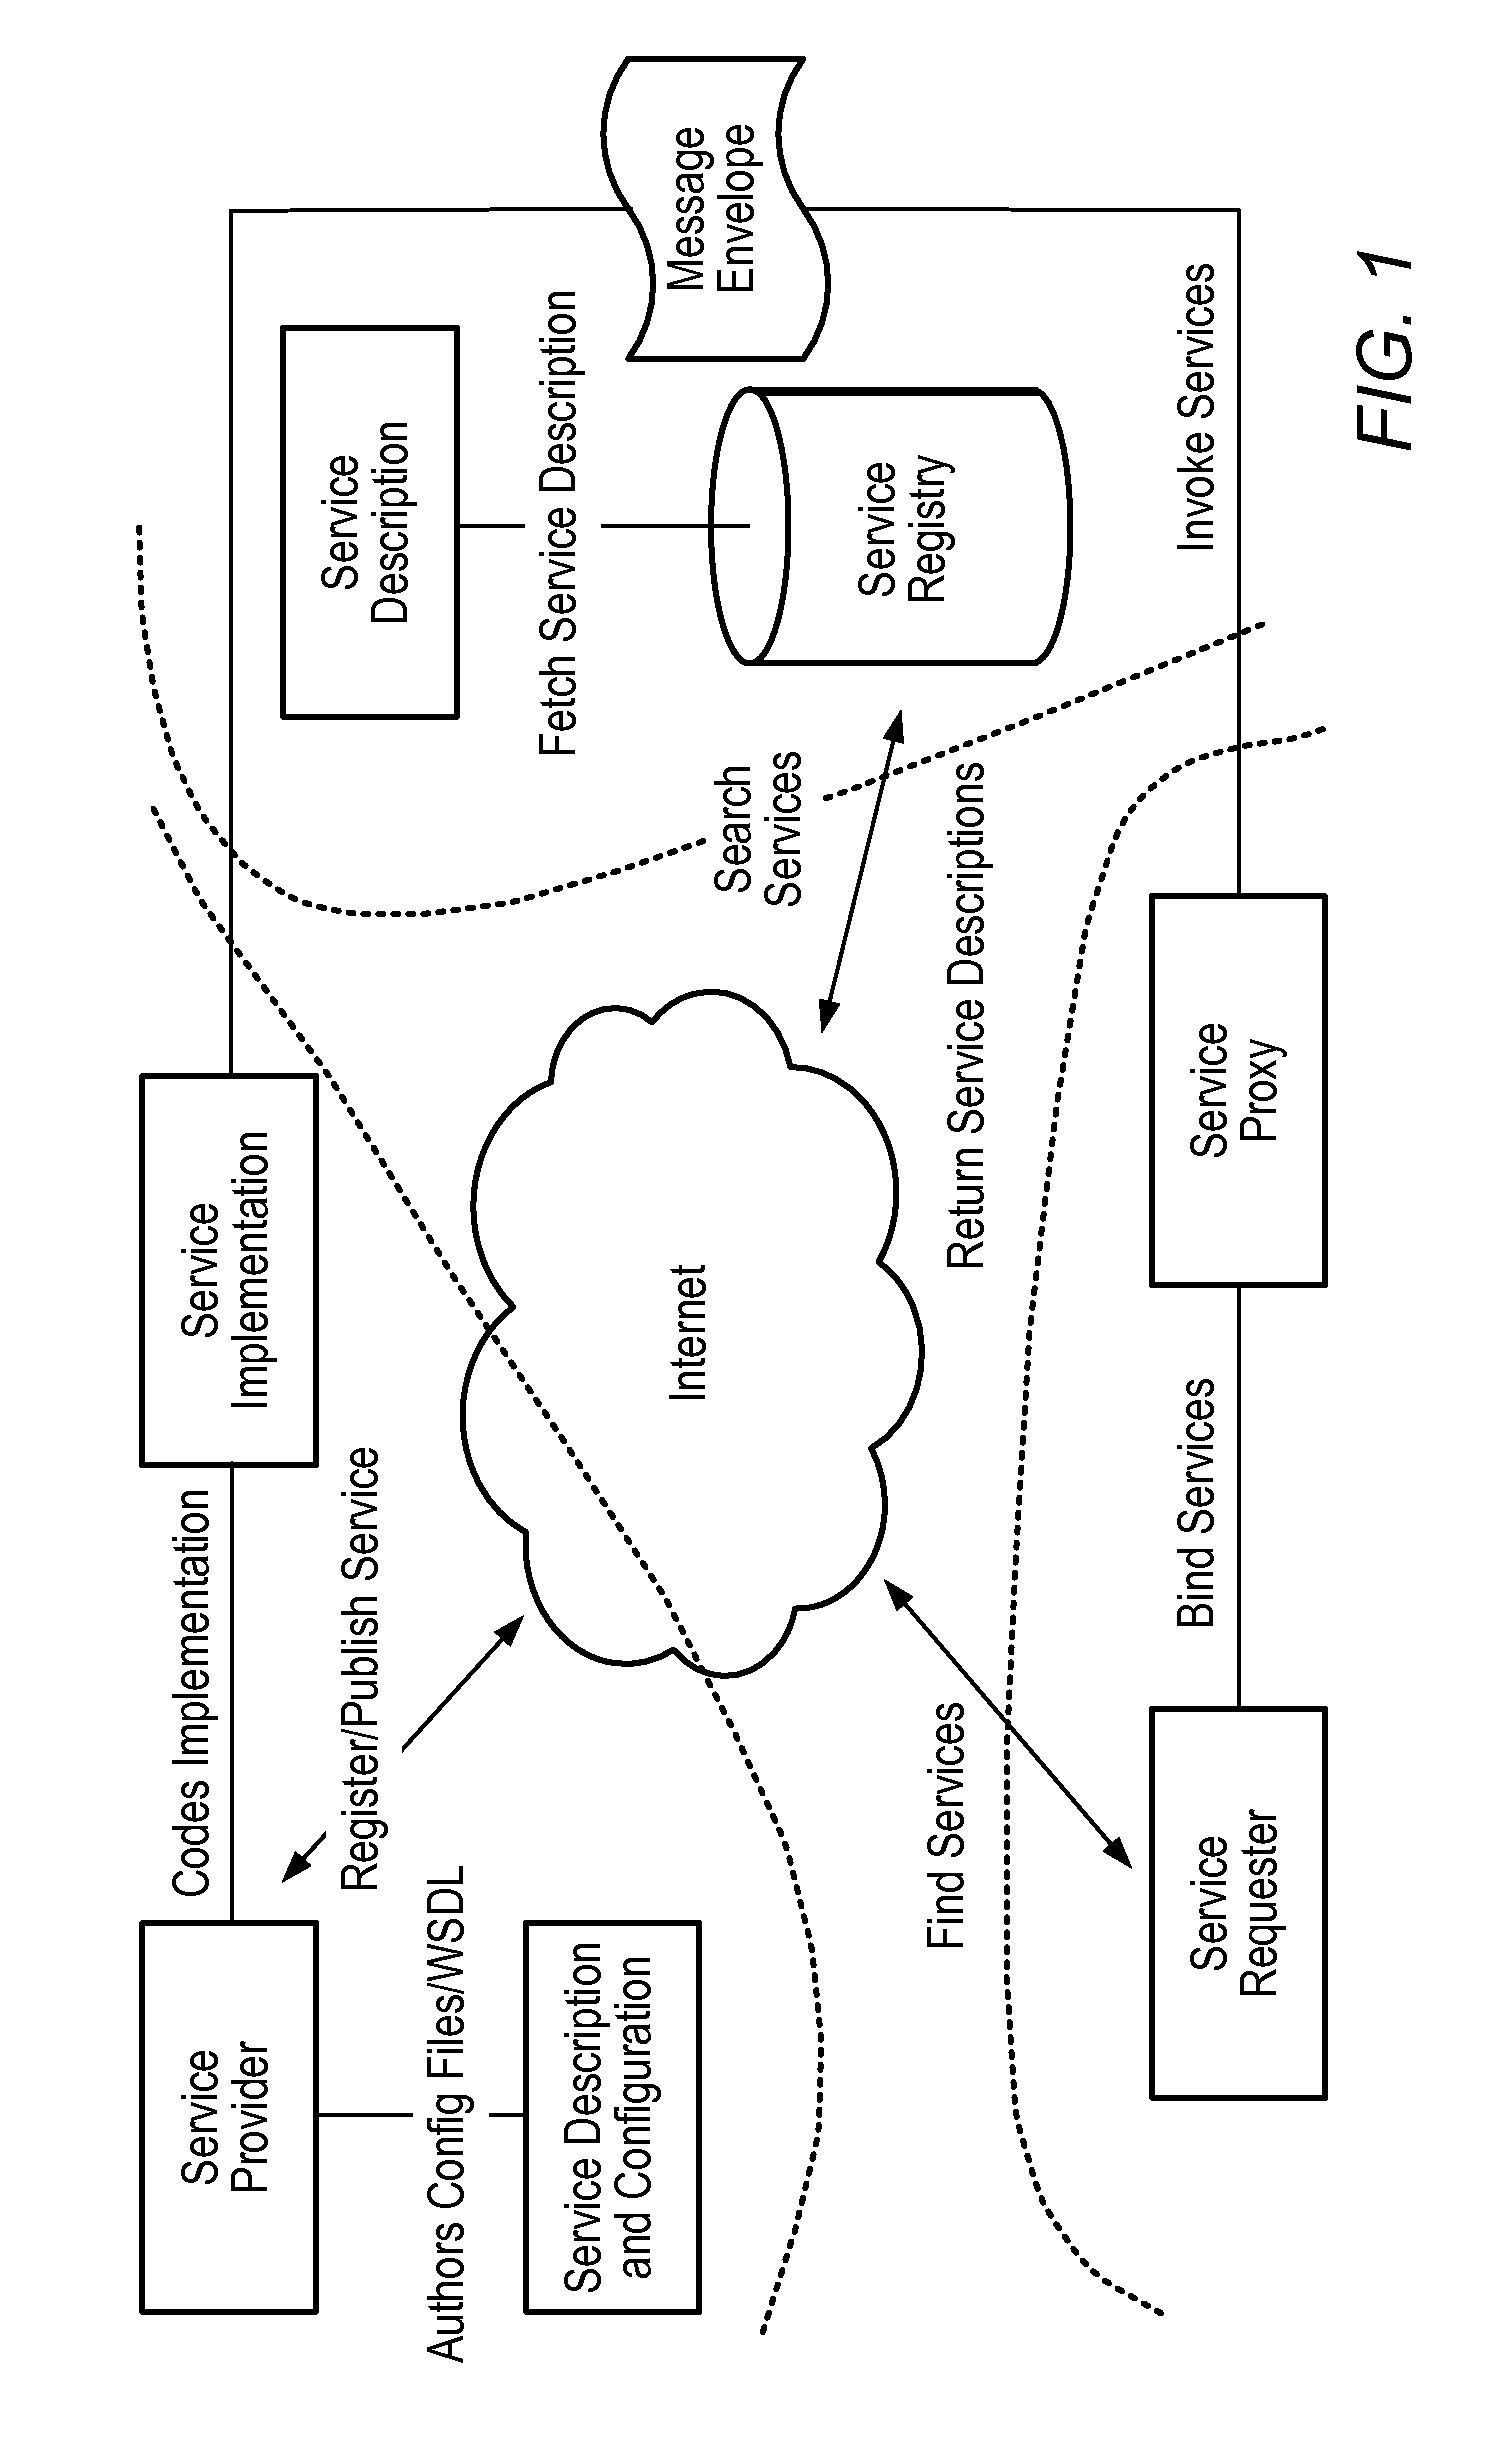 System and method for integration of web services